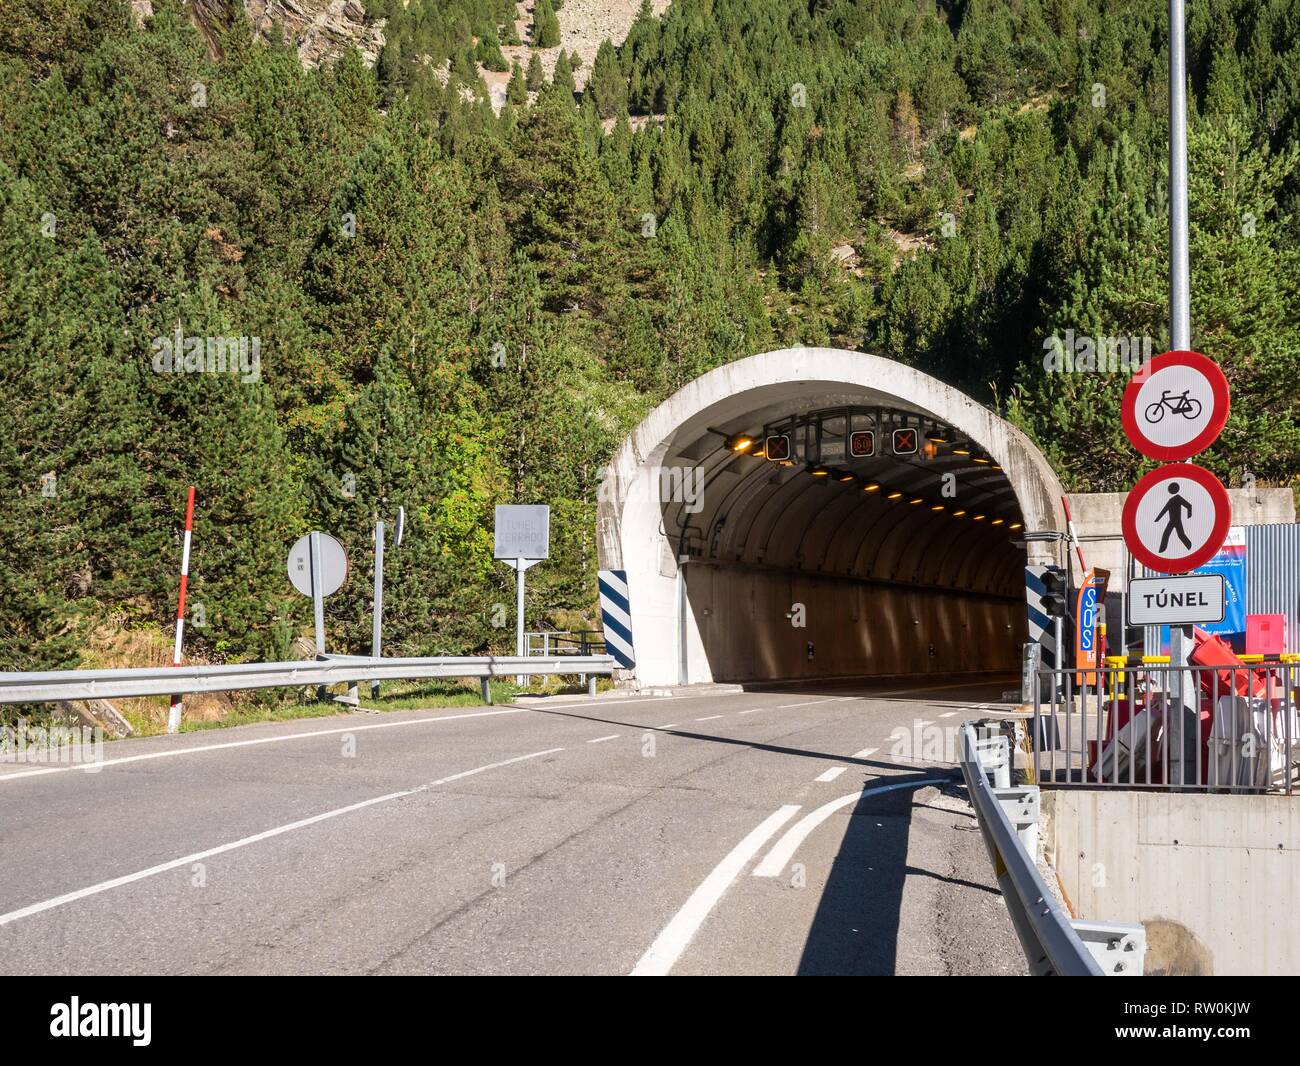 Bielsa-Aragnouet tunnel, border between Spain and France, tunnel entrance on the Spanish side Stock Photo